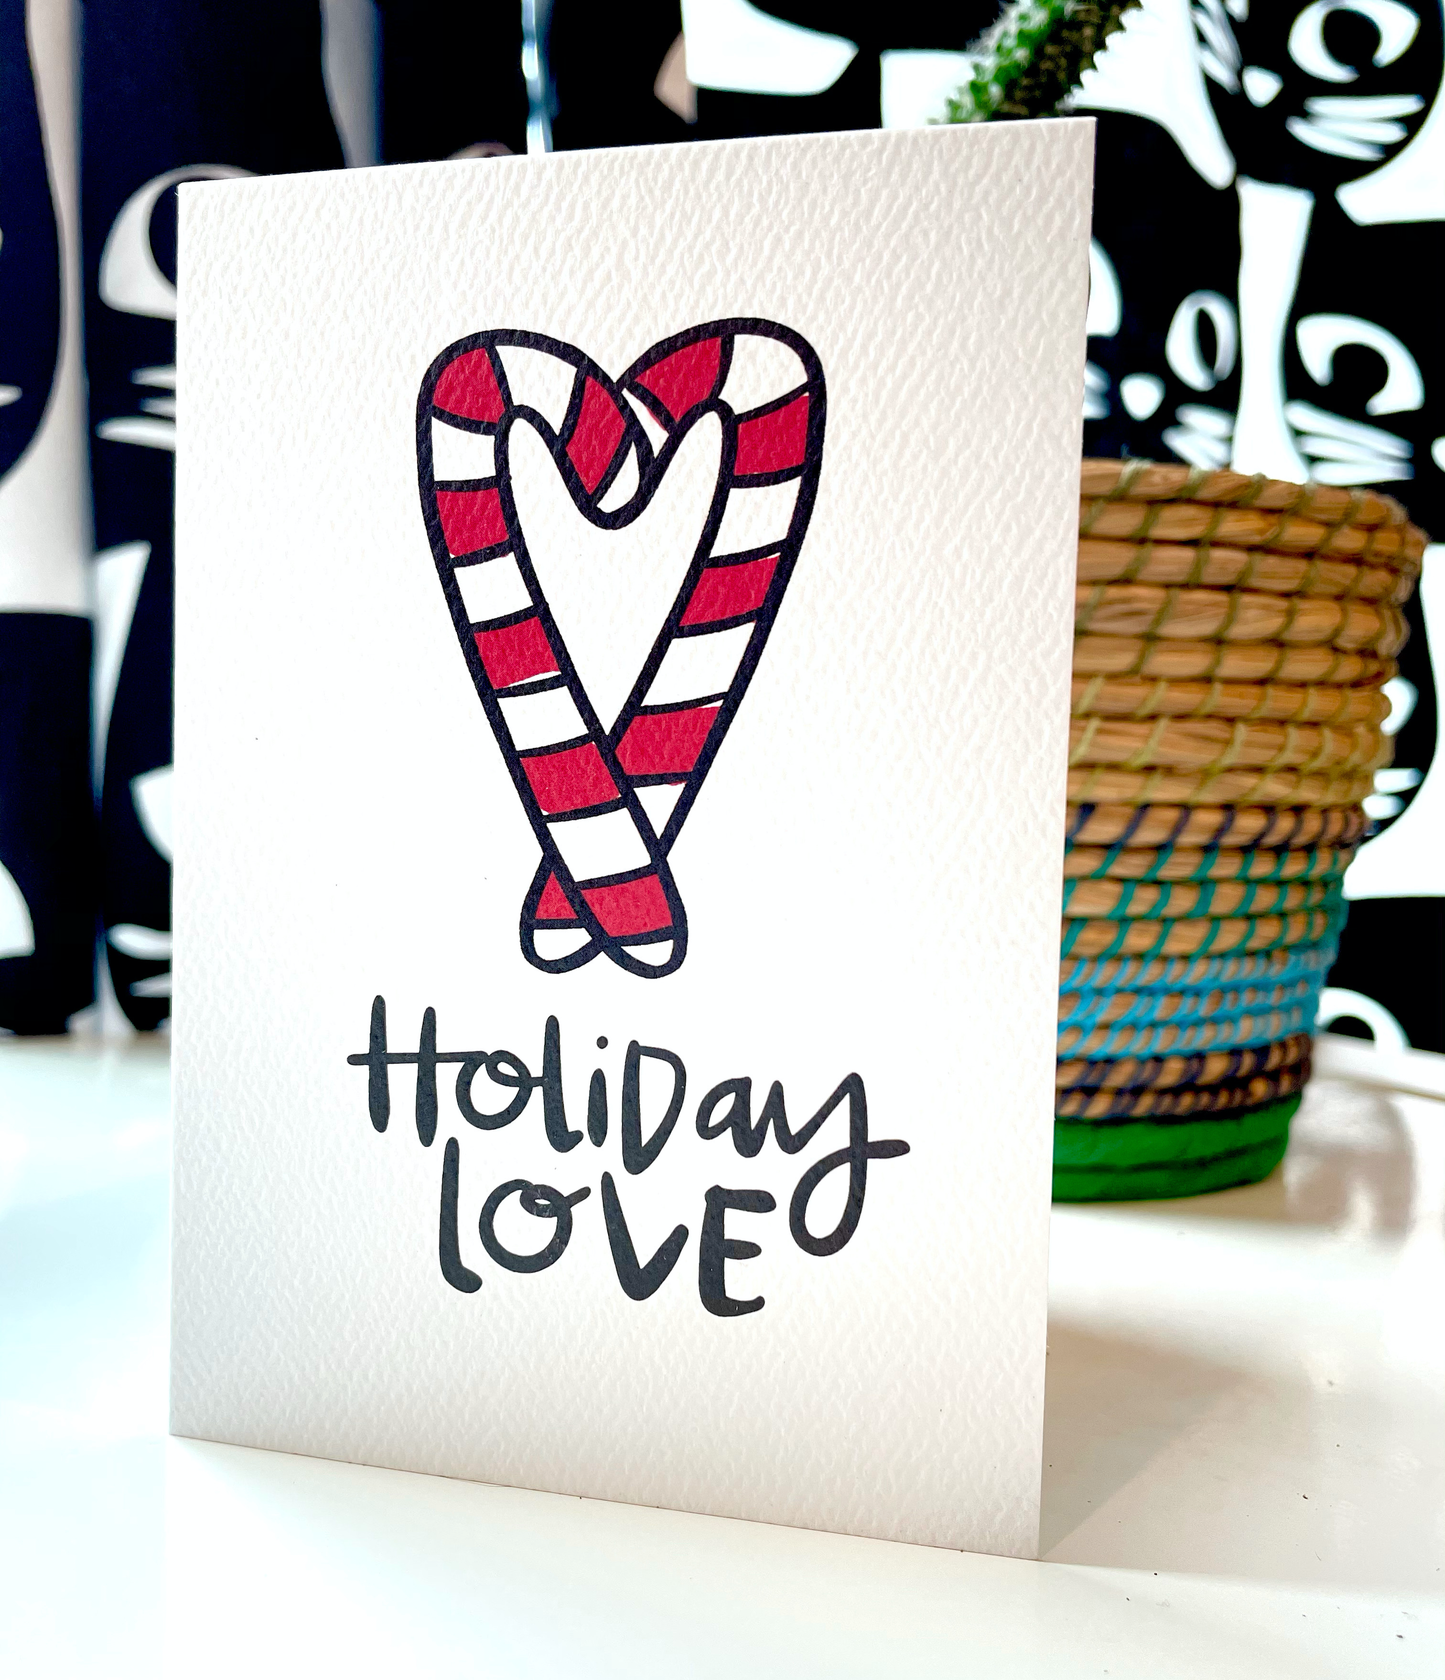 HOLIDAY LOVE CANDY CANE CARD